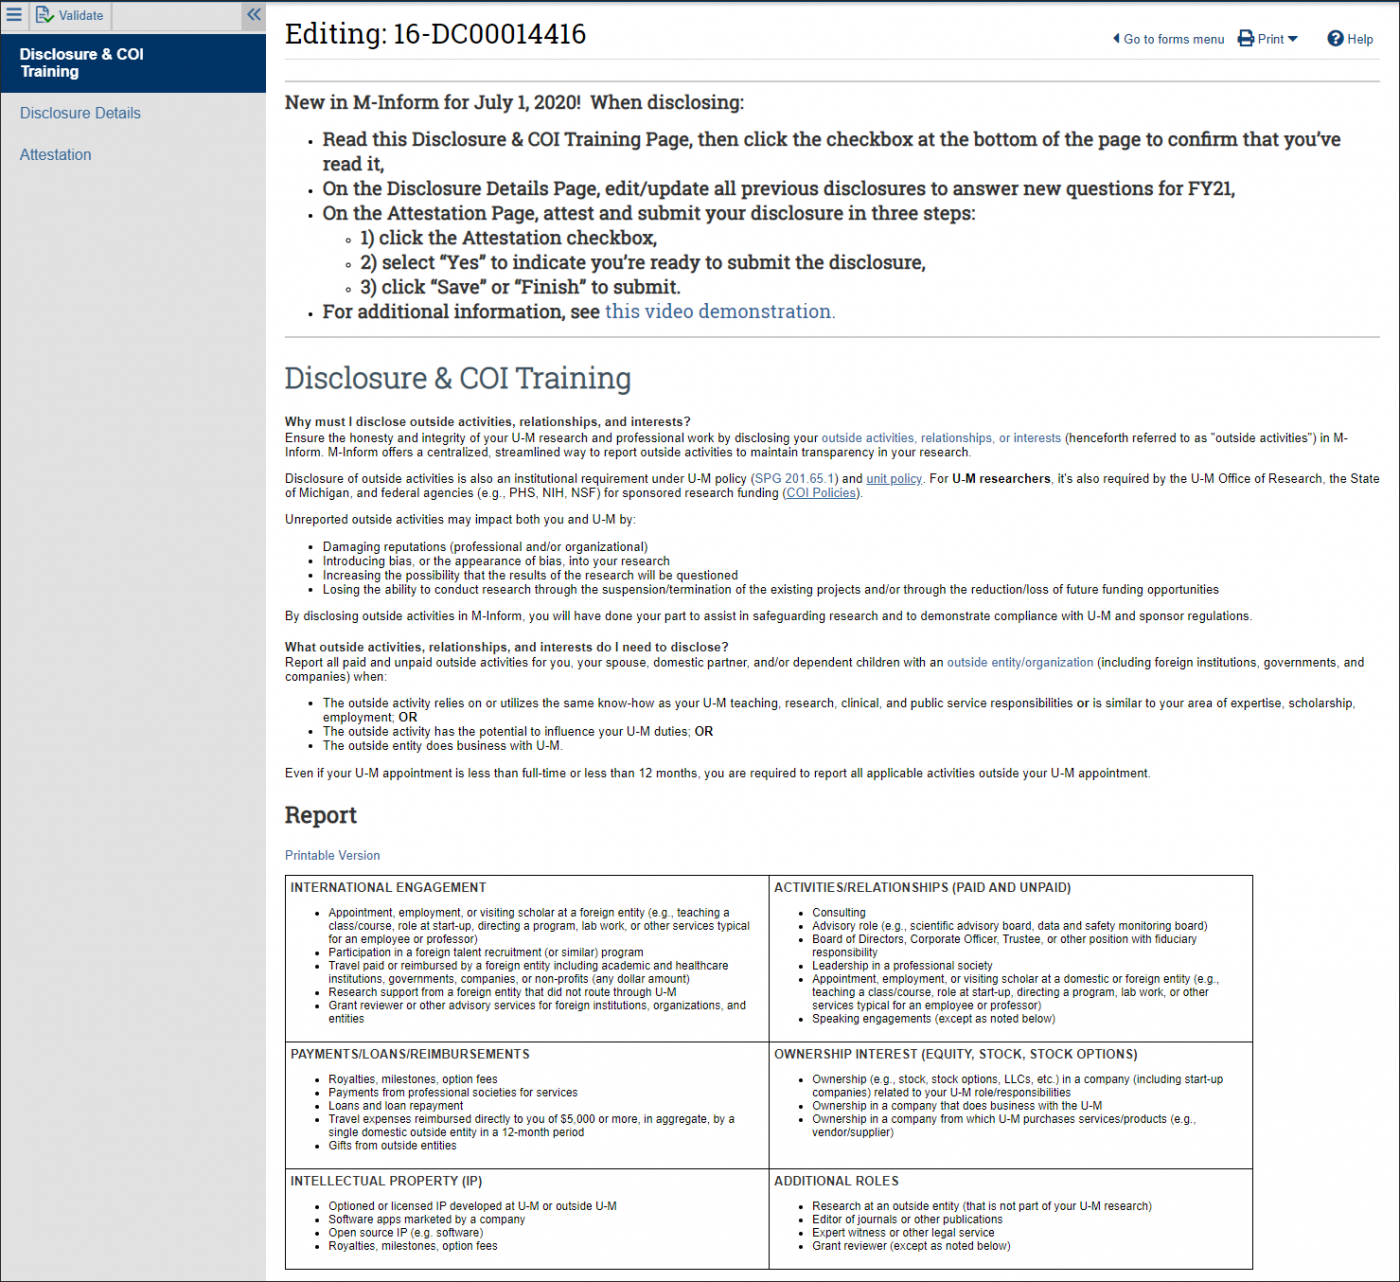 M-Inform Disclosure & COI Training page top